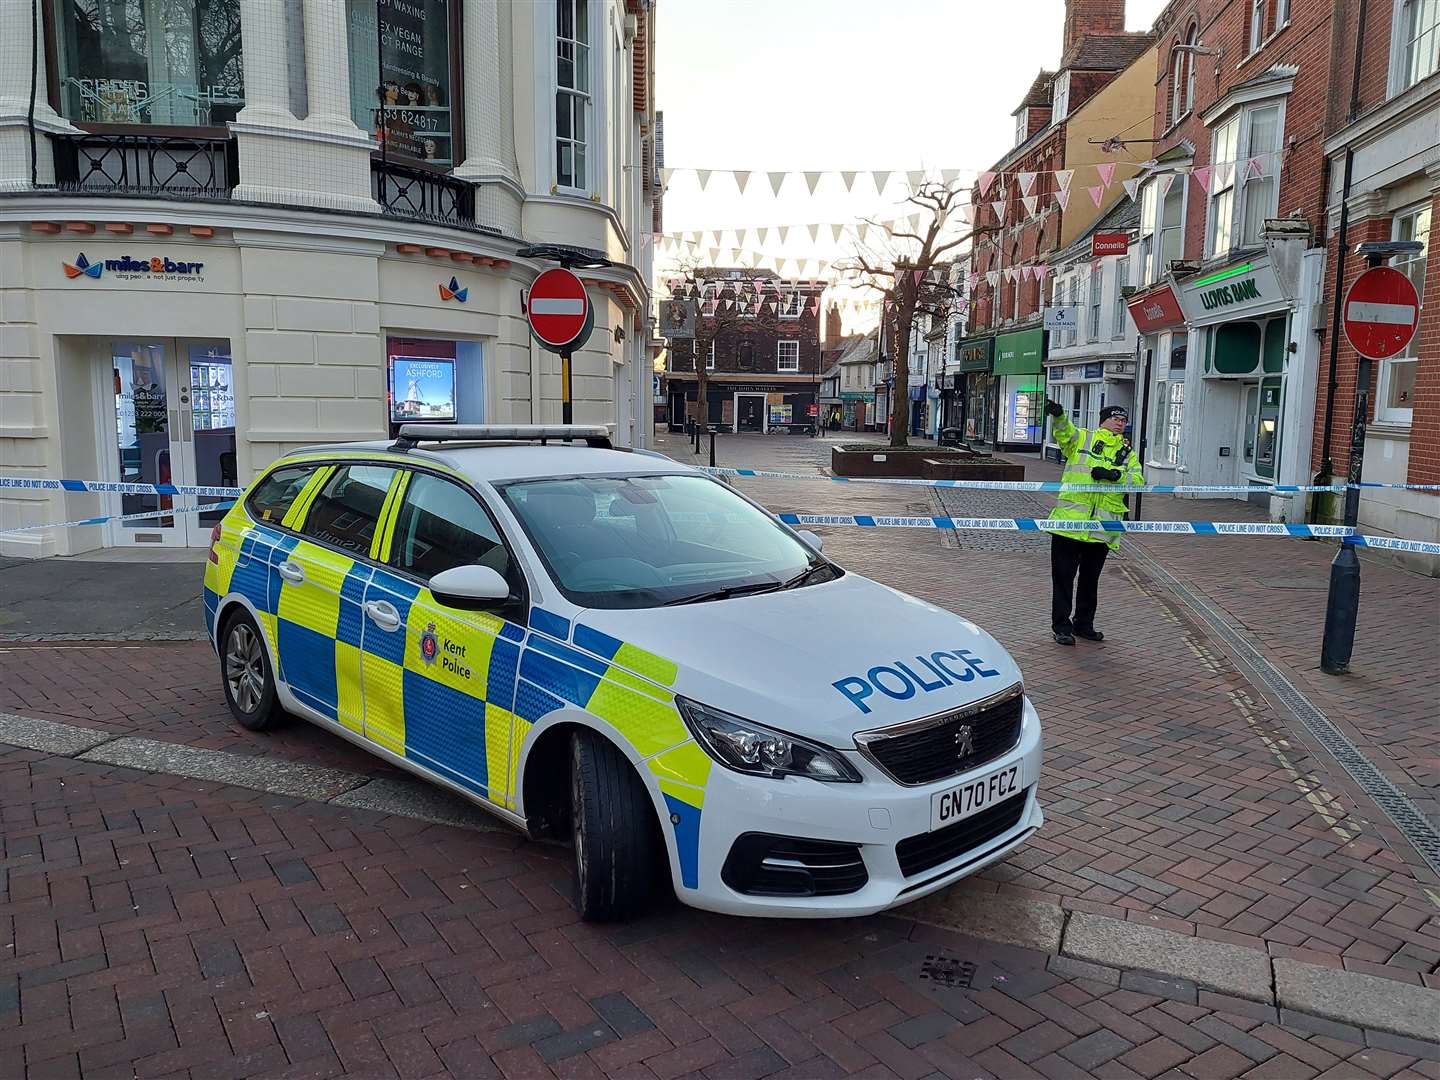 Officers had closed off a huge chunk of the town centre